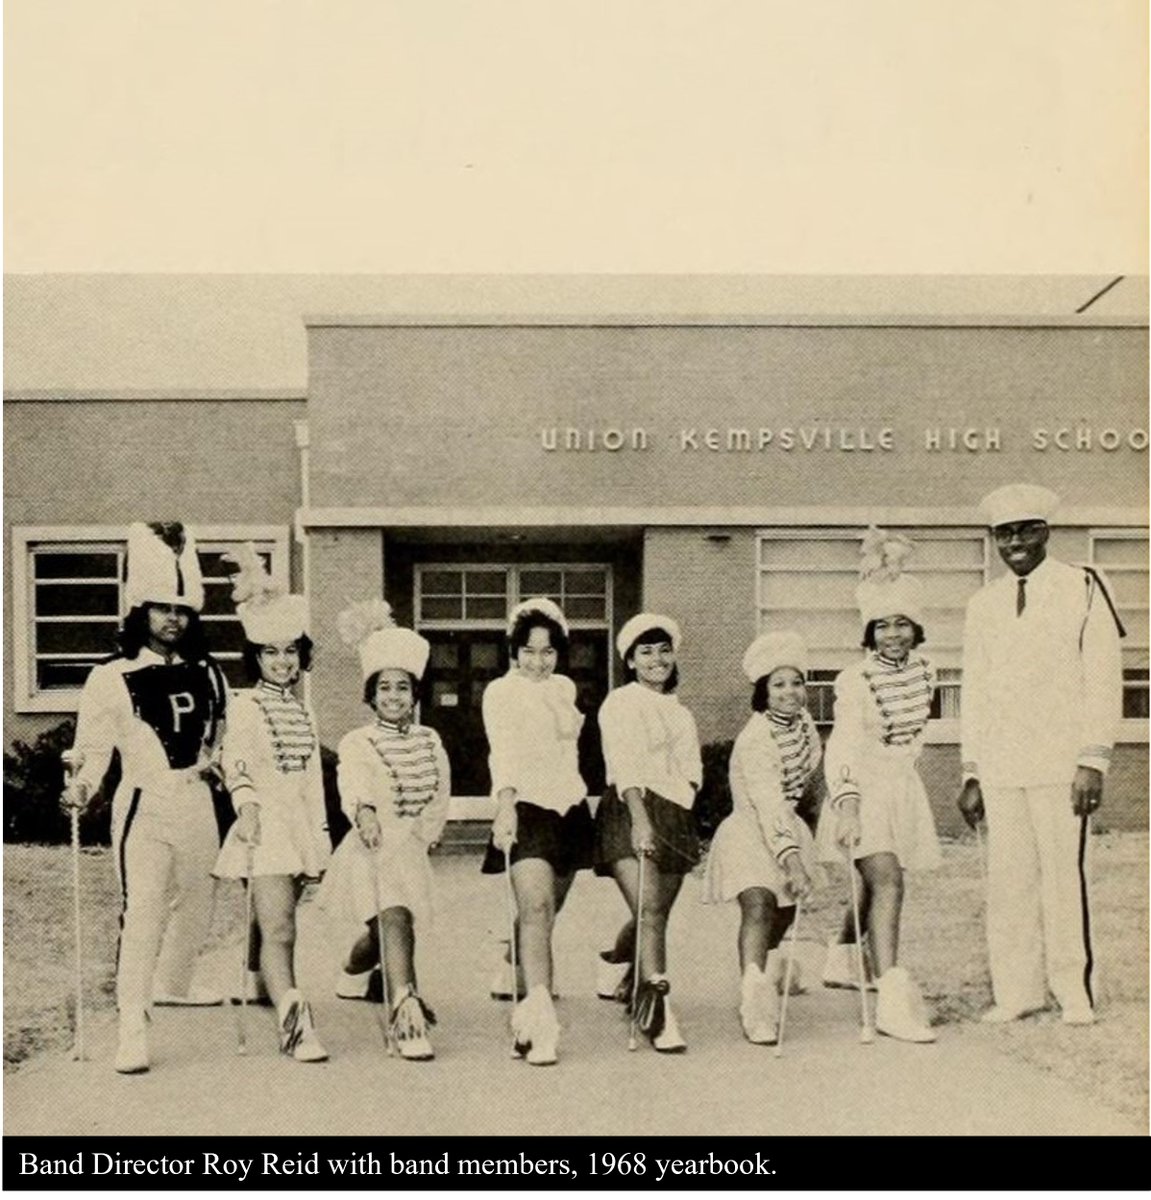 Band director Roy Reid and students in front of Union Kempsville High School in 1968. #BlackHistoryMonth #vbhistorymuseums